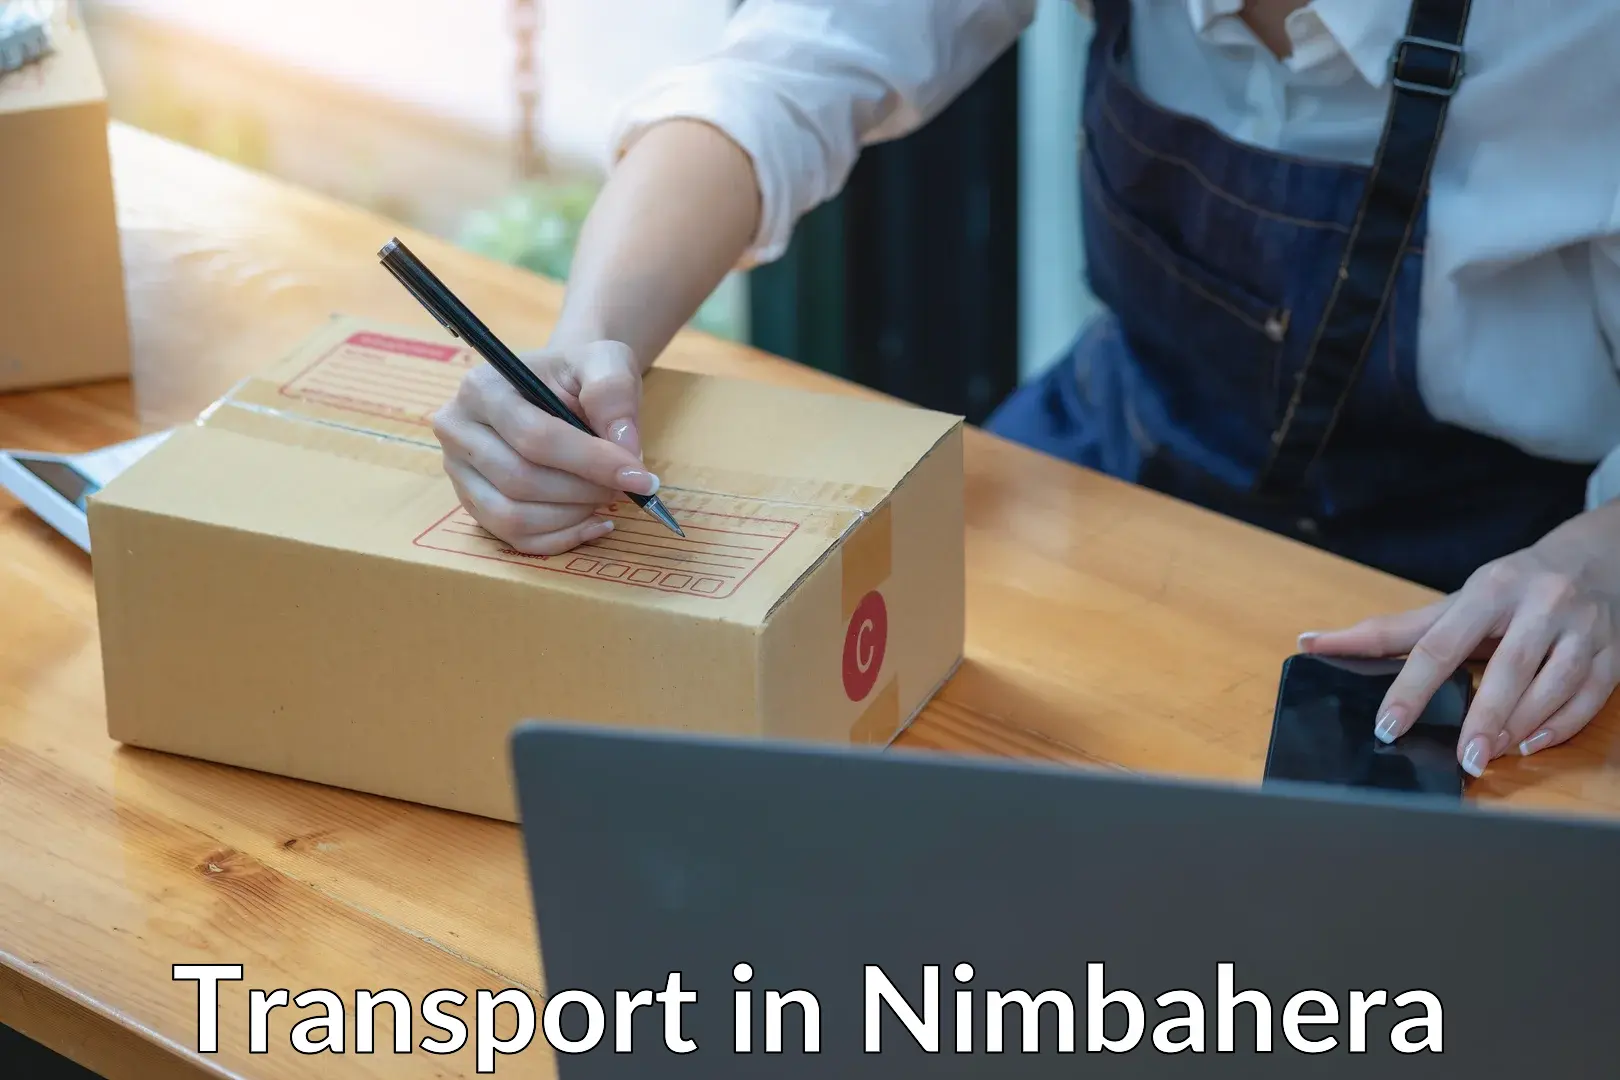 Shipping services in Nimbahera